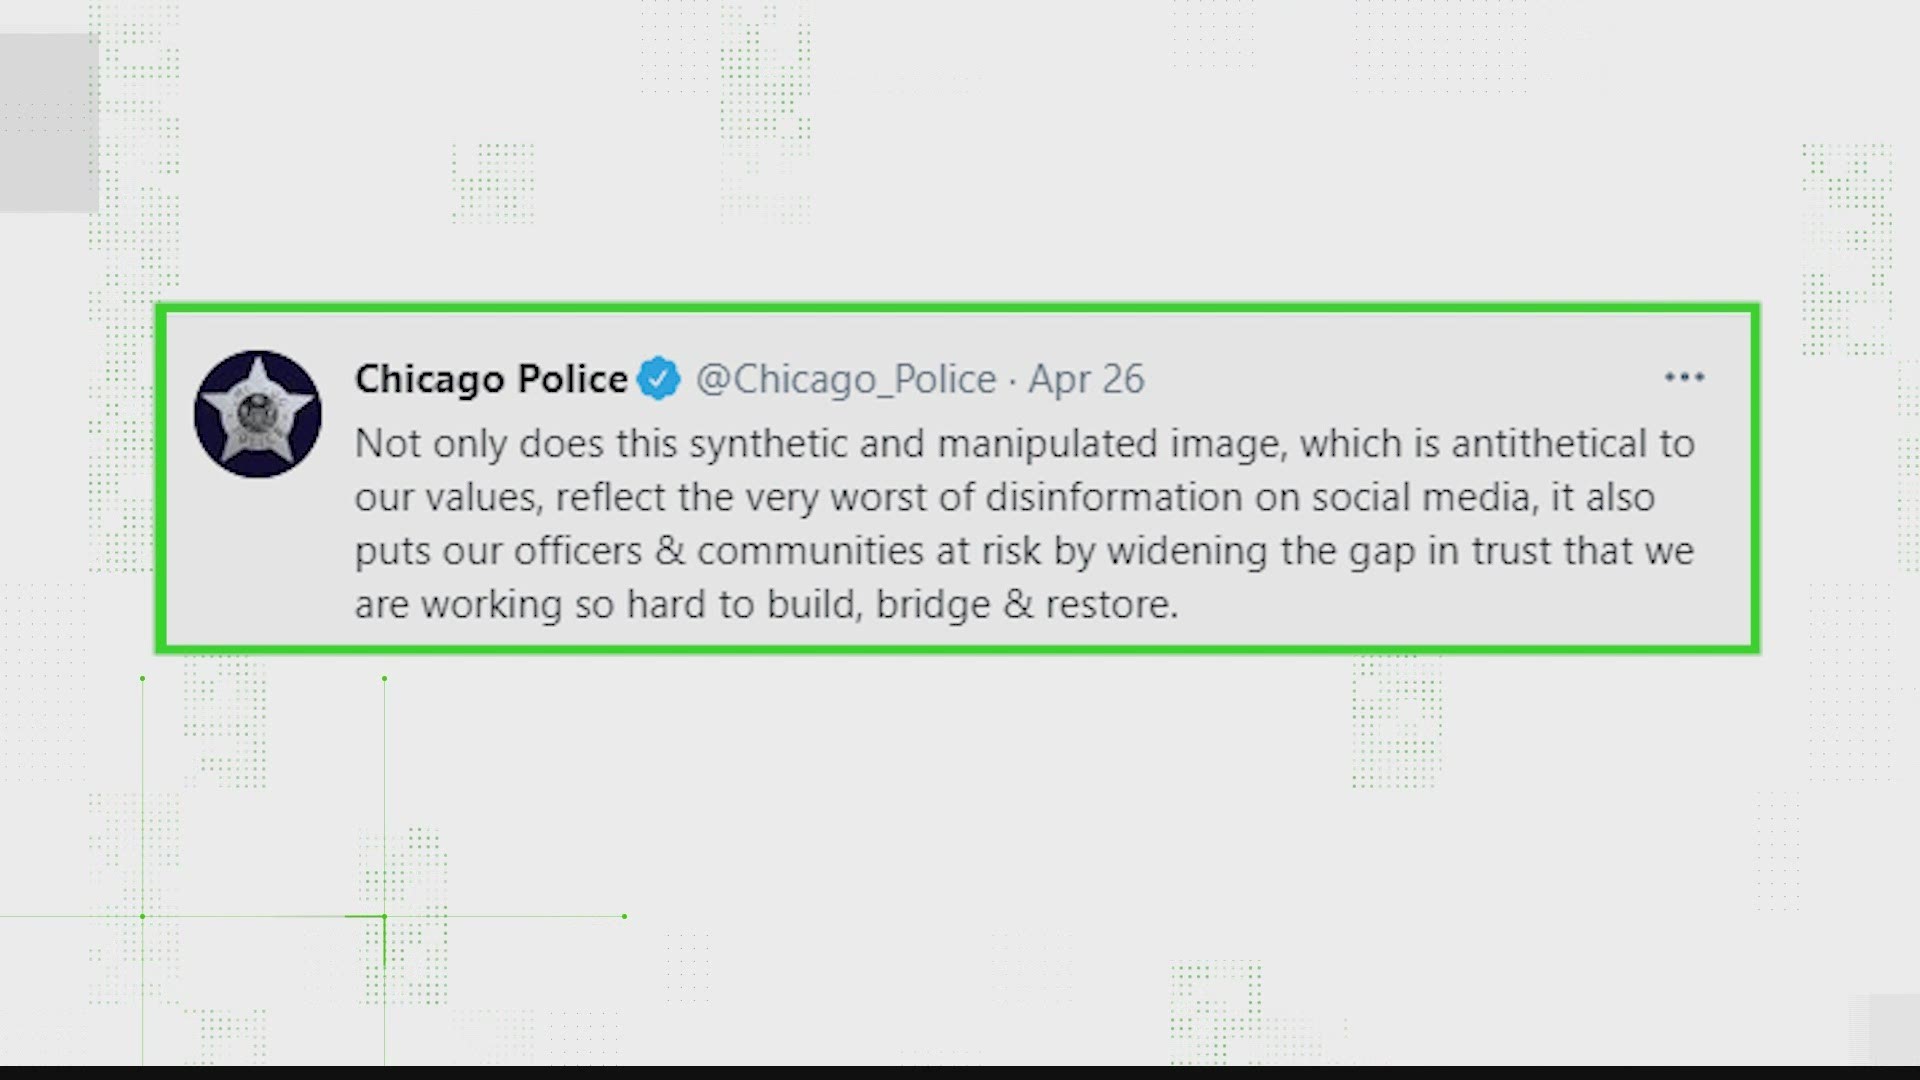 There’s no evidence the tweet was ever posted and the Chicago Police Department has denied it.